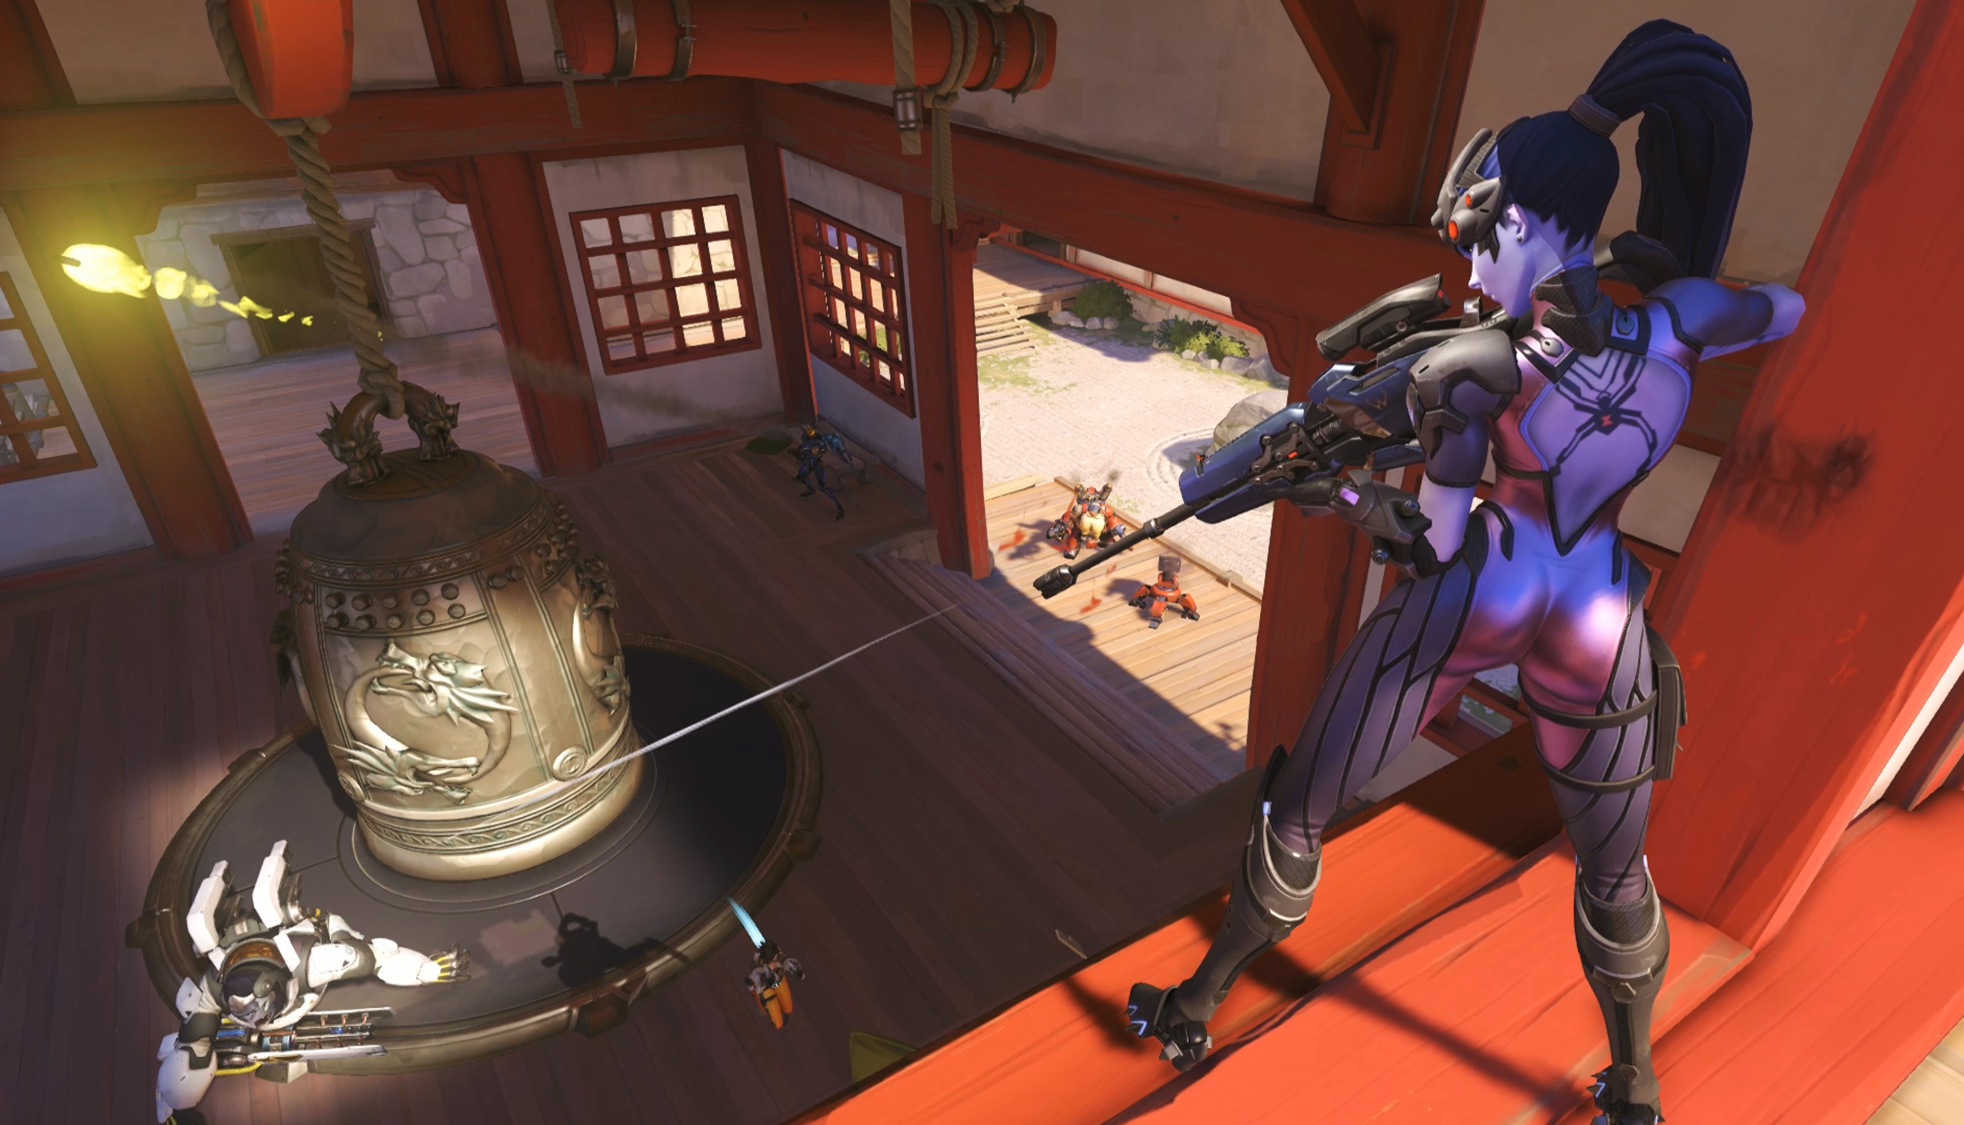 Overwatch' Character's Sexy Victory Pose Removed By Blizzard After  Complaints; Flame War Ensues - TheWrap